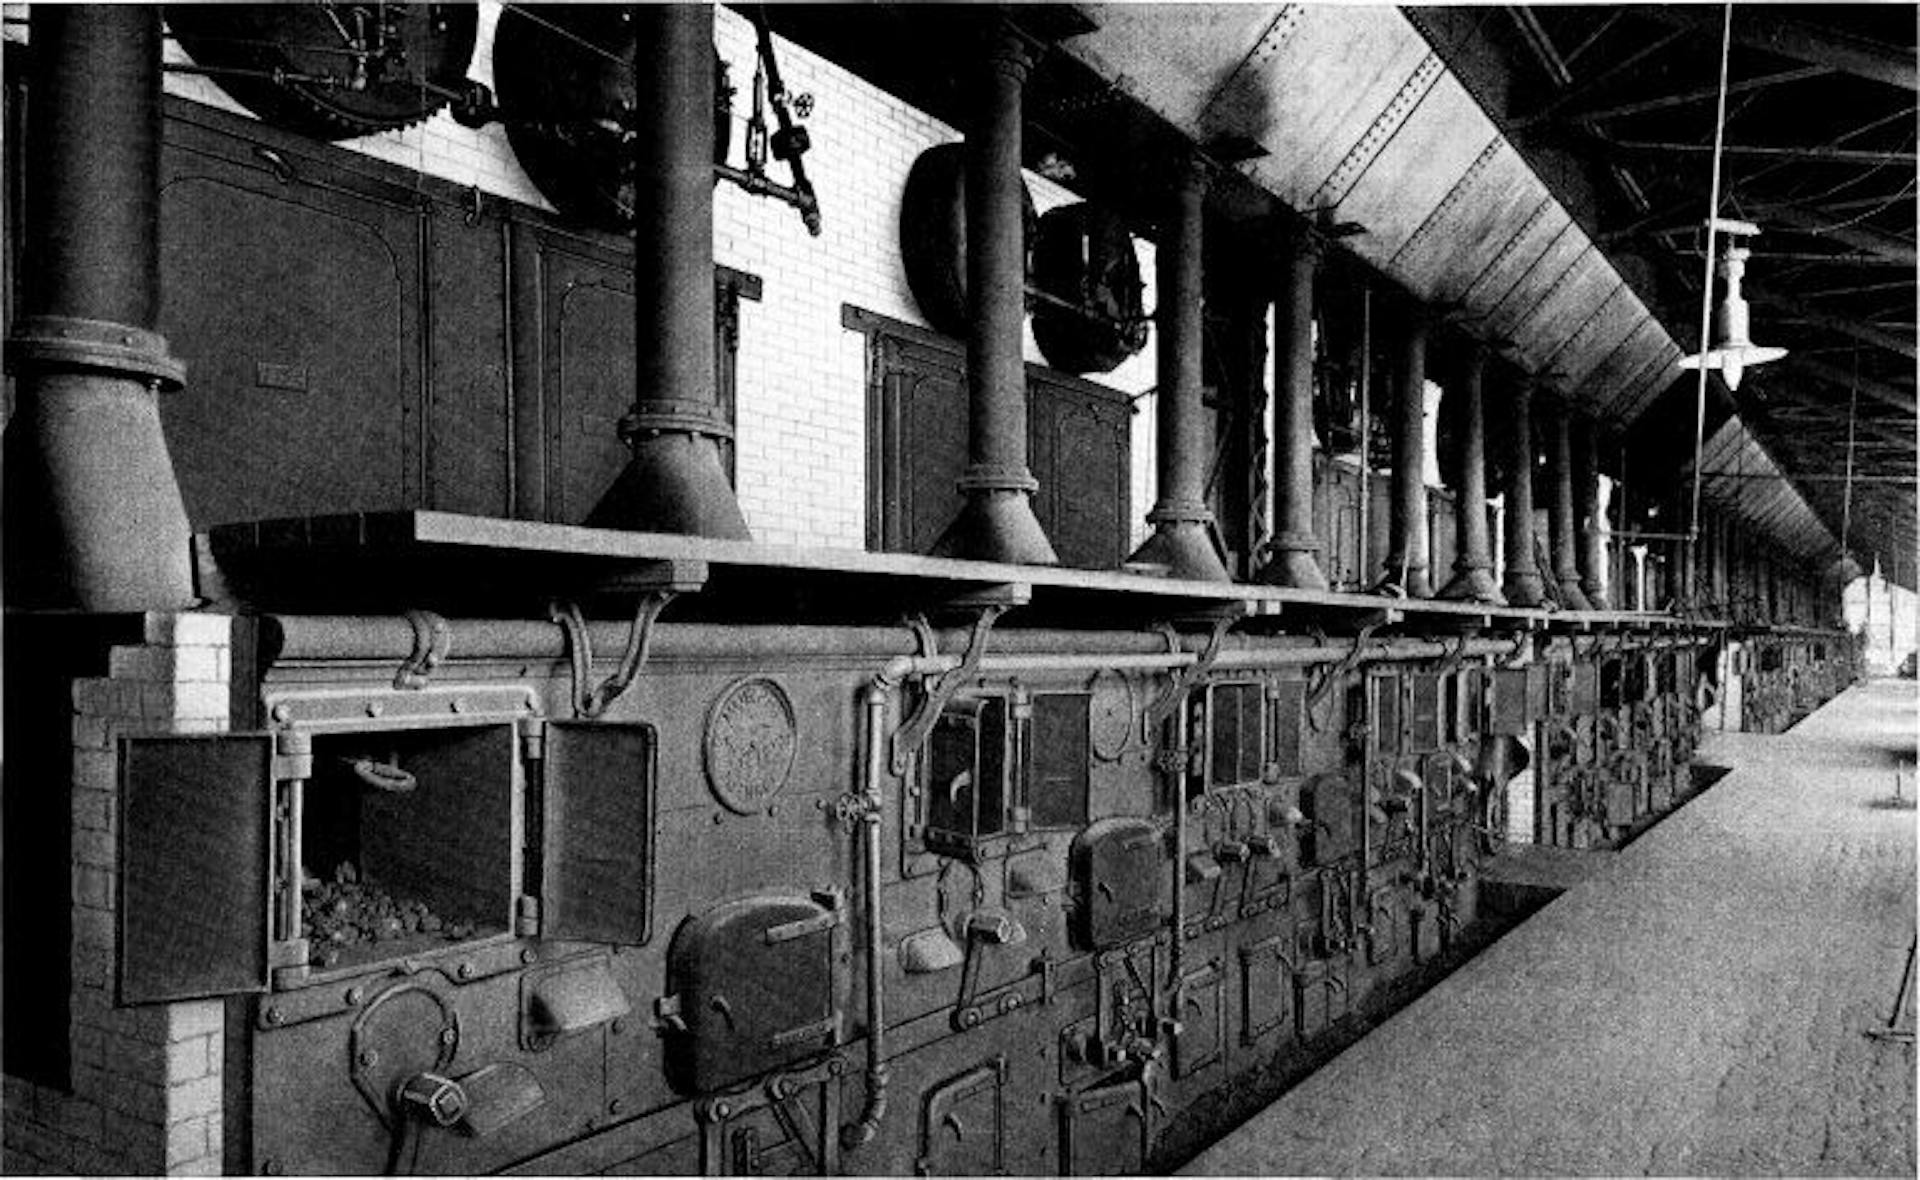 4880 Horse-power Installation of Babcock & Wilcox Boilers at the Open Hearth Plant of the Cambria Steel Co., Johnstown, Pa. This Company Operates a Total of 52,000 Horse Power of Babcock & Wilcox Boilers